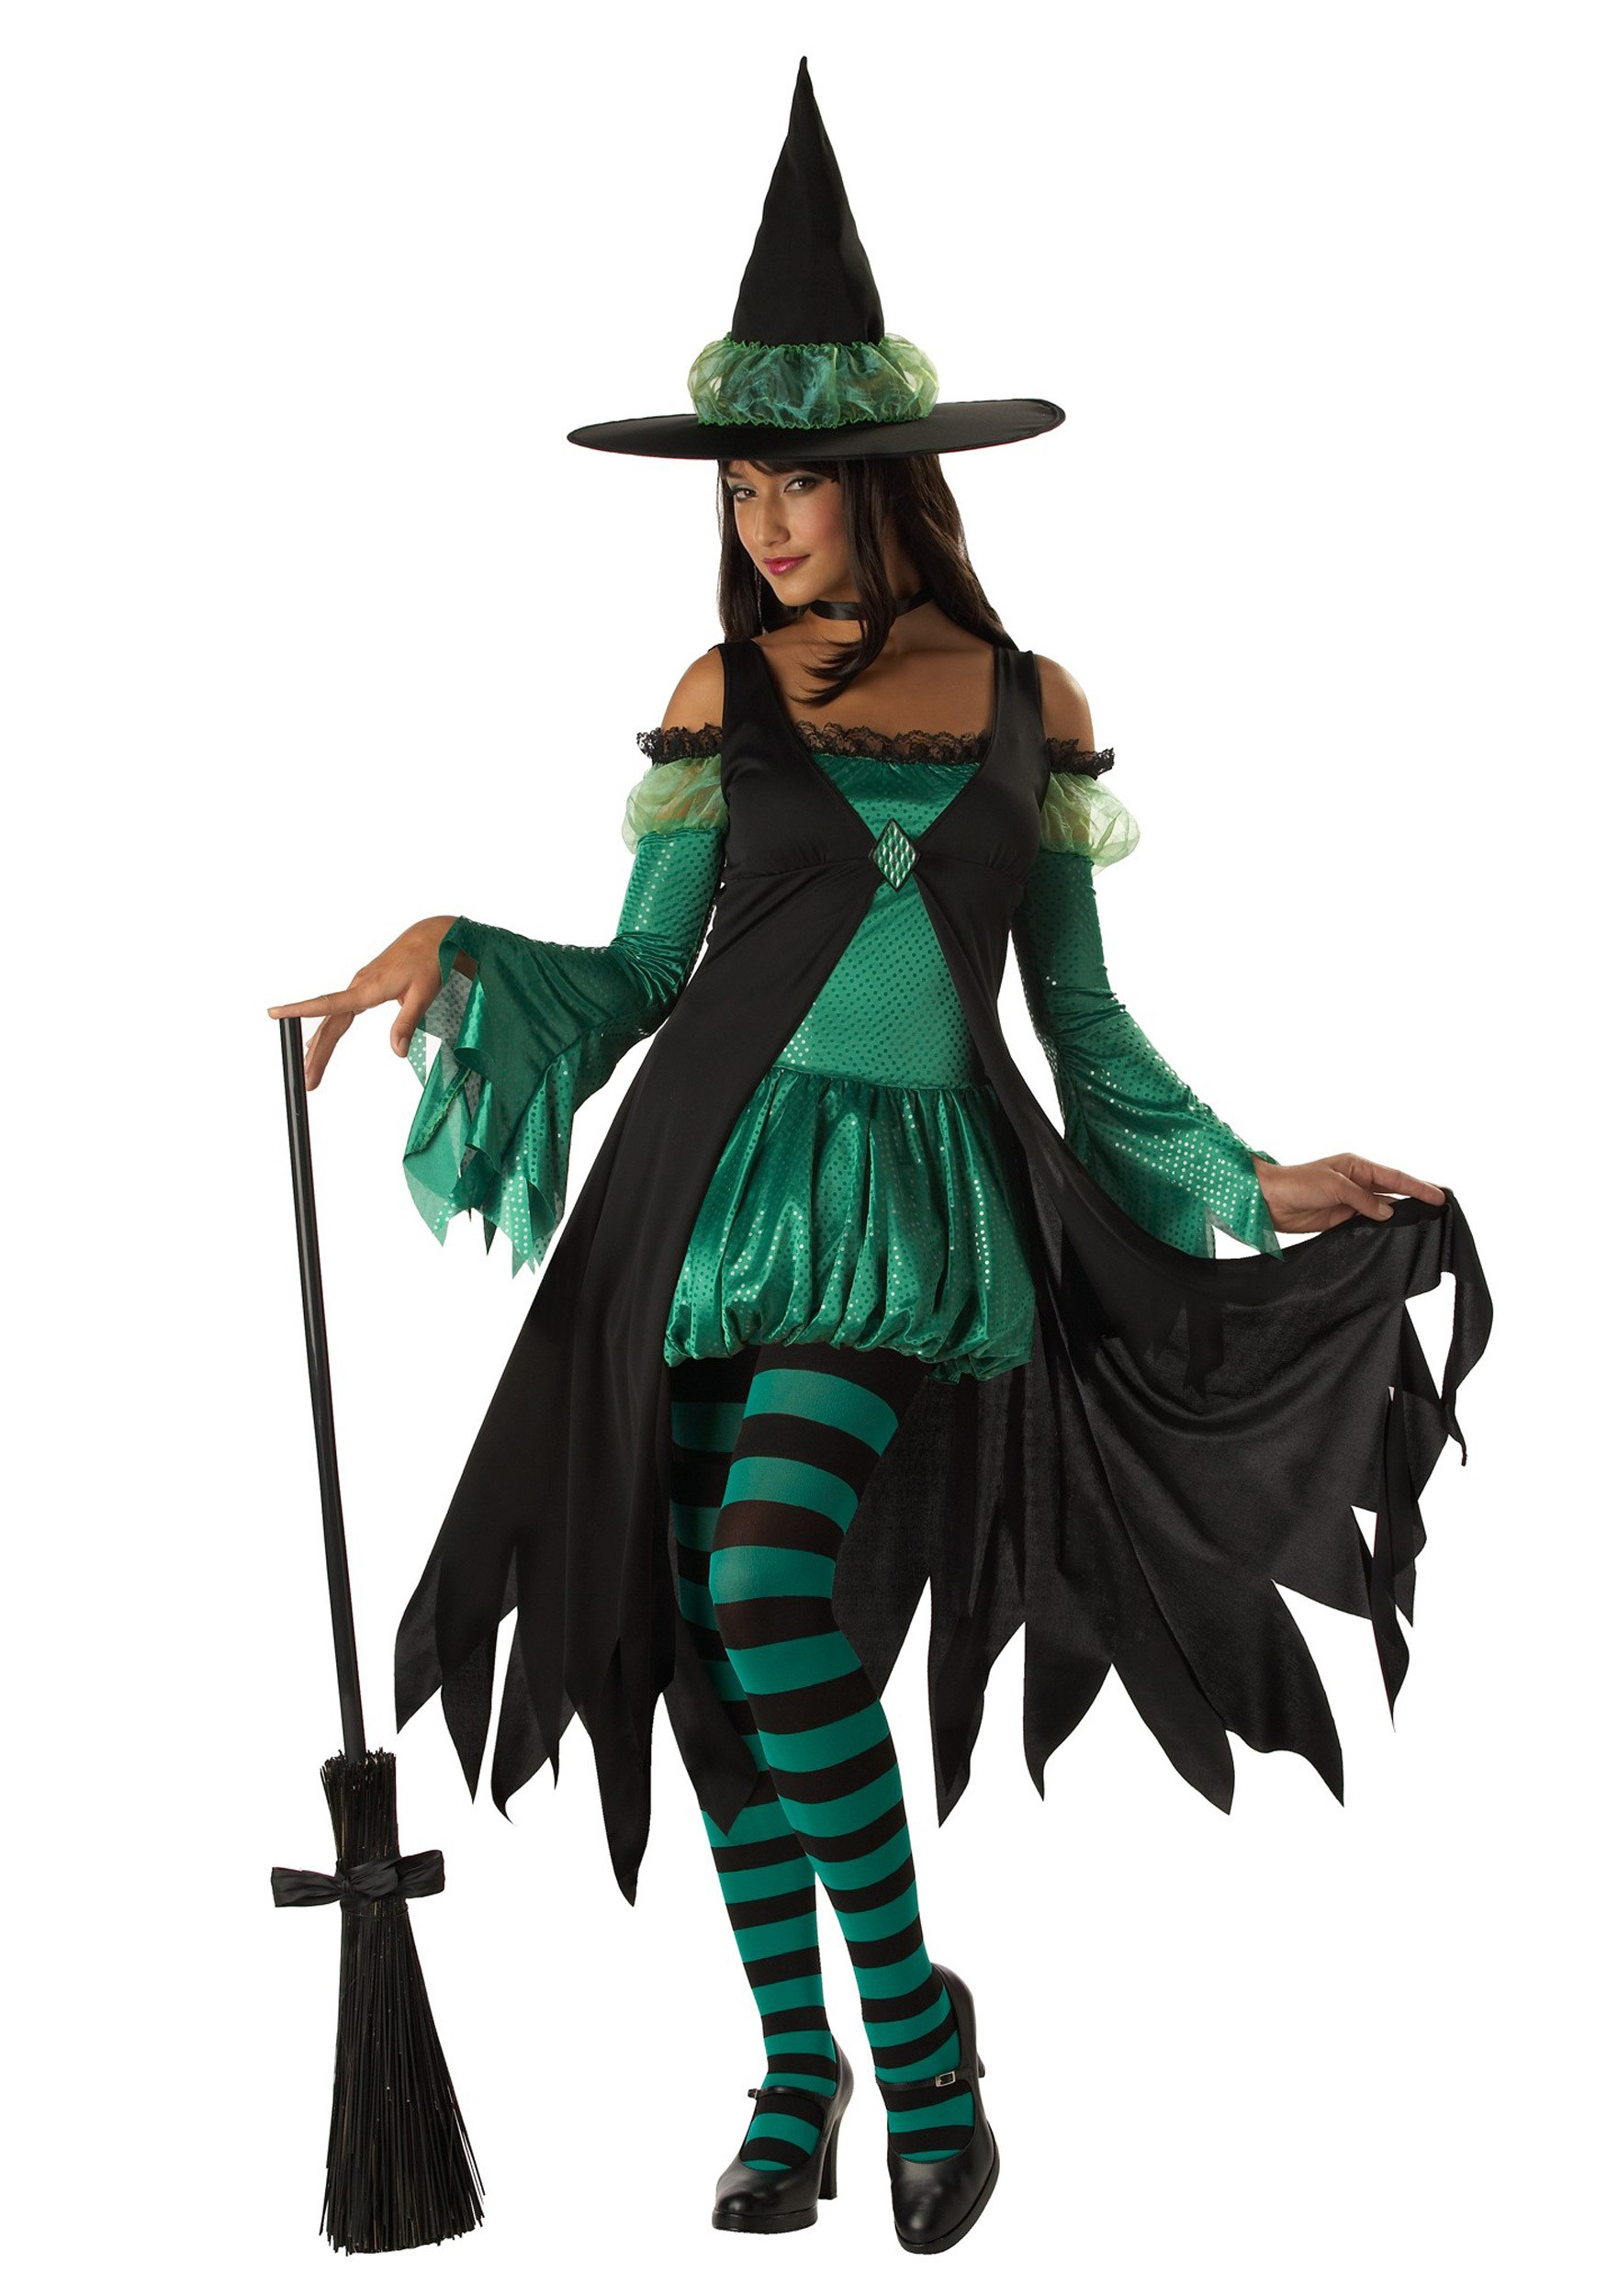 The 20 Best Ideas for Diy Adult Witch Costume – Home, Family, Style and ...